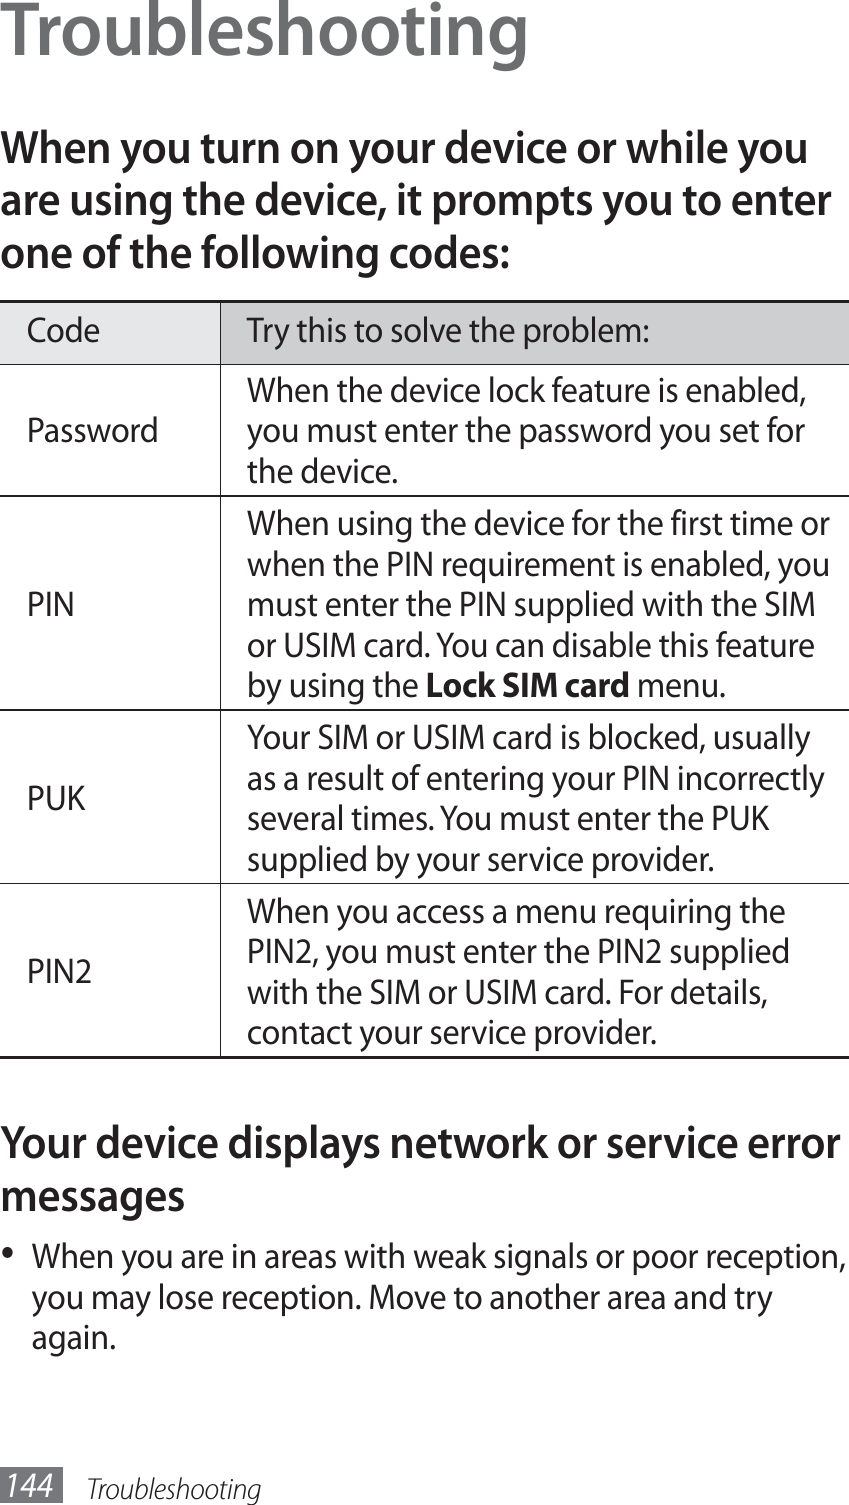 Troubleshooting144TroubleshootingWhen you turn on your device or while you are using the device, it prompts you to enter one of the following codes:Code Try this to solve the problem:PasswordWhen the device lock feature is enabled, you must enter the password you set for the device.PINWhen using the device for the first time or when the PIN requirement is enabled, you must enter the PIN supplied with the SIM or USIM card. You can disable this feature by using the Lock SIM card menu.PUKYour SIM or USIM card is blocked, usually as a result of entering your PIN incorrectly several times. You must enter the PUK supplied by your service provider. PIN2When you access a menu requiring the PIN2, you must enter the PIN2 supplied with the SIM or USIM card. For details, contact your service provider.Your device displays network or service error messagesWhen you are in areas with weak signals or poor reception, • you may lose reception. Move to another area and try again.